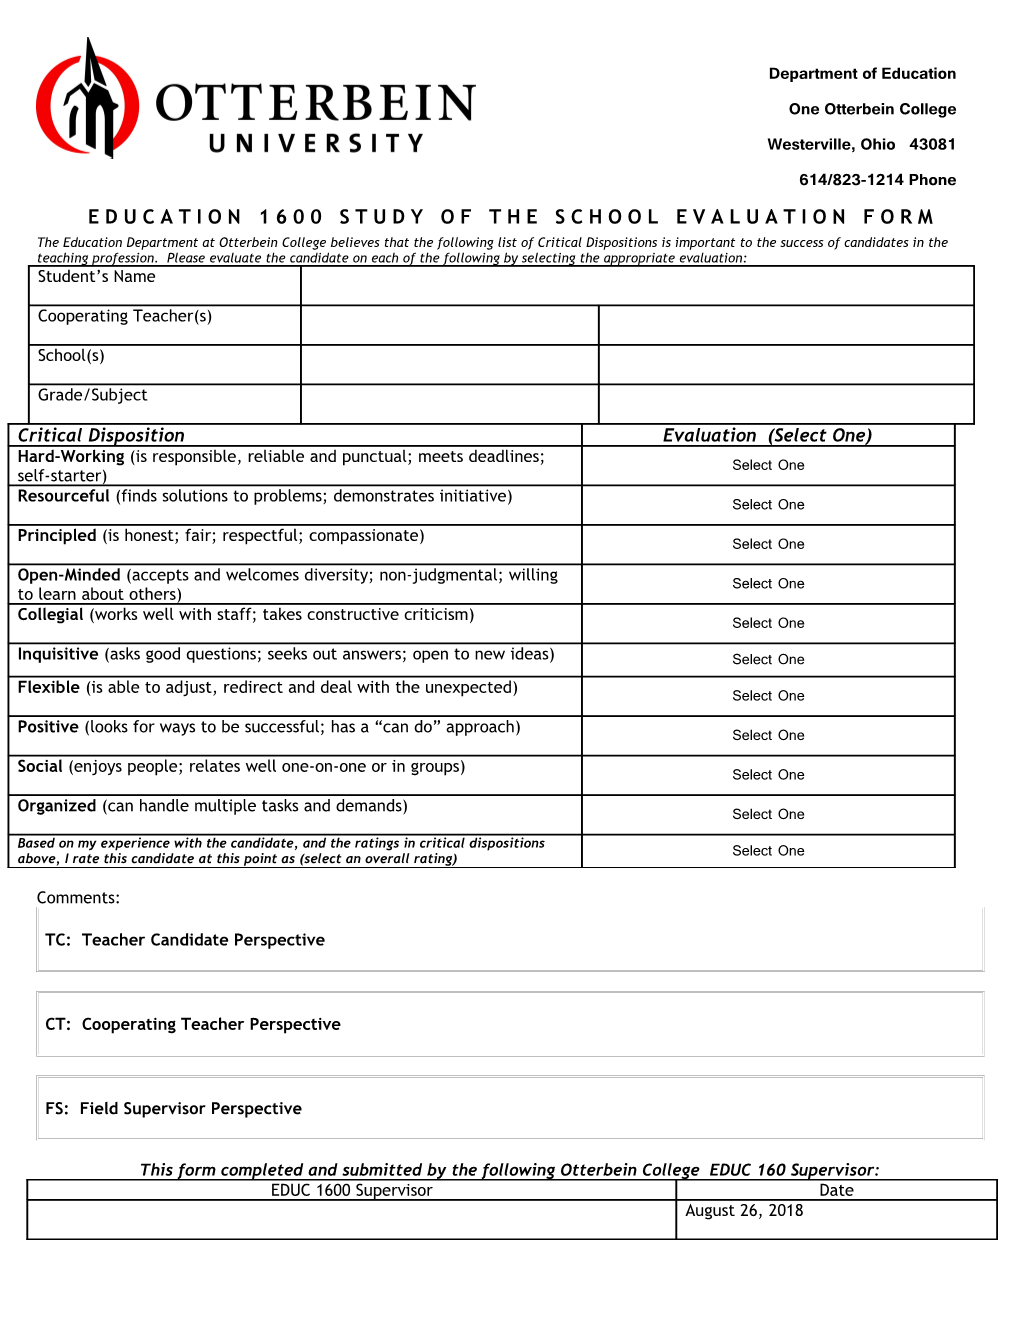 Education 1600 Study of the School Evaluation Form